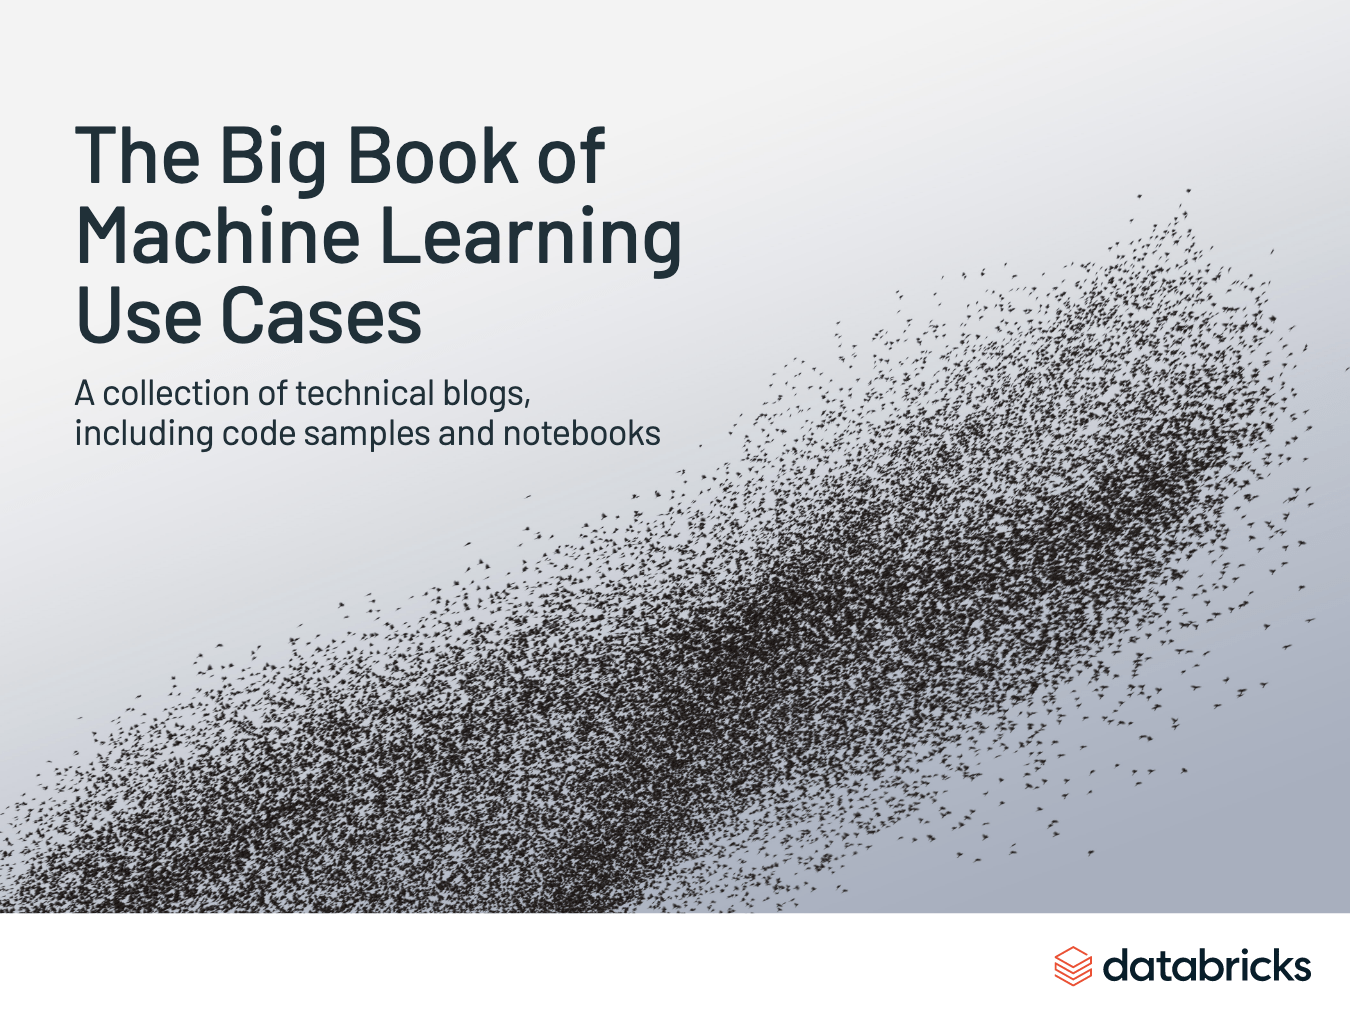 machine learning use cases - The Big Book of Machine Learning Use Cases